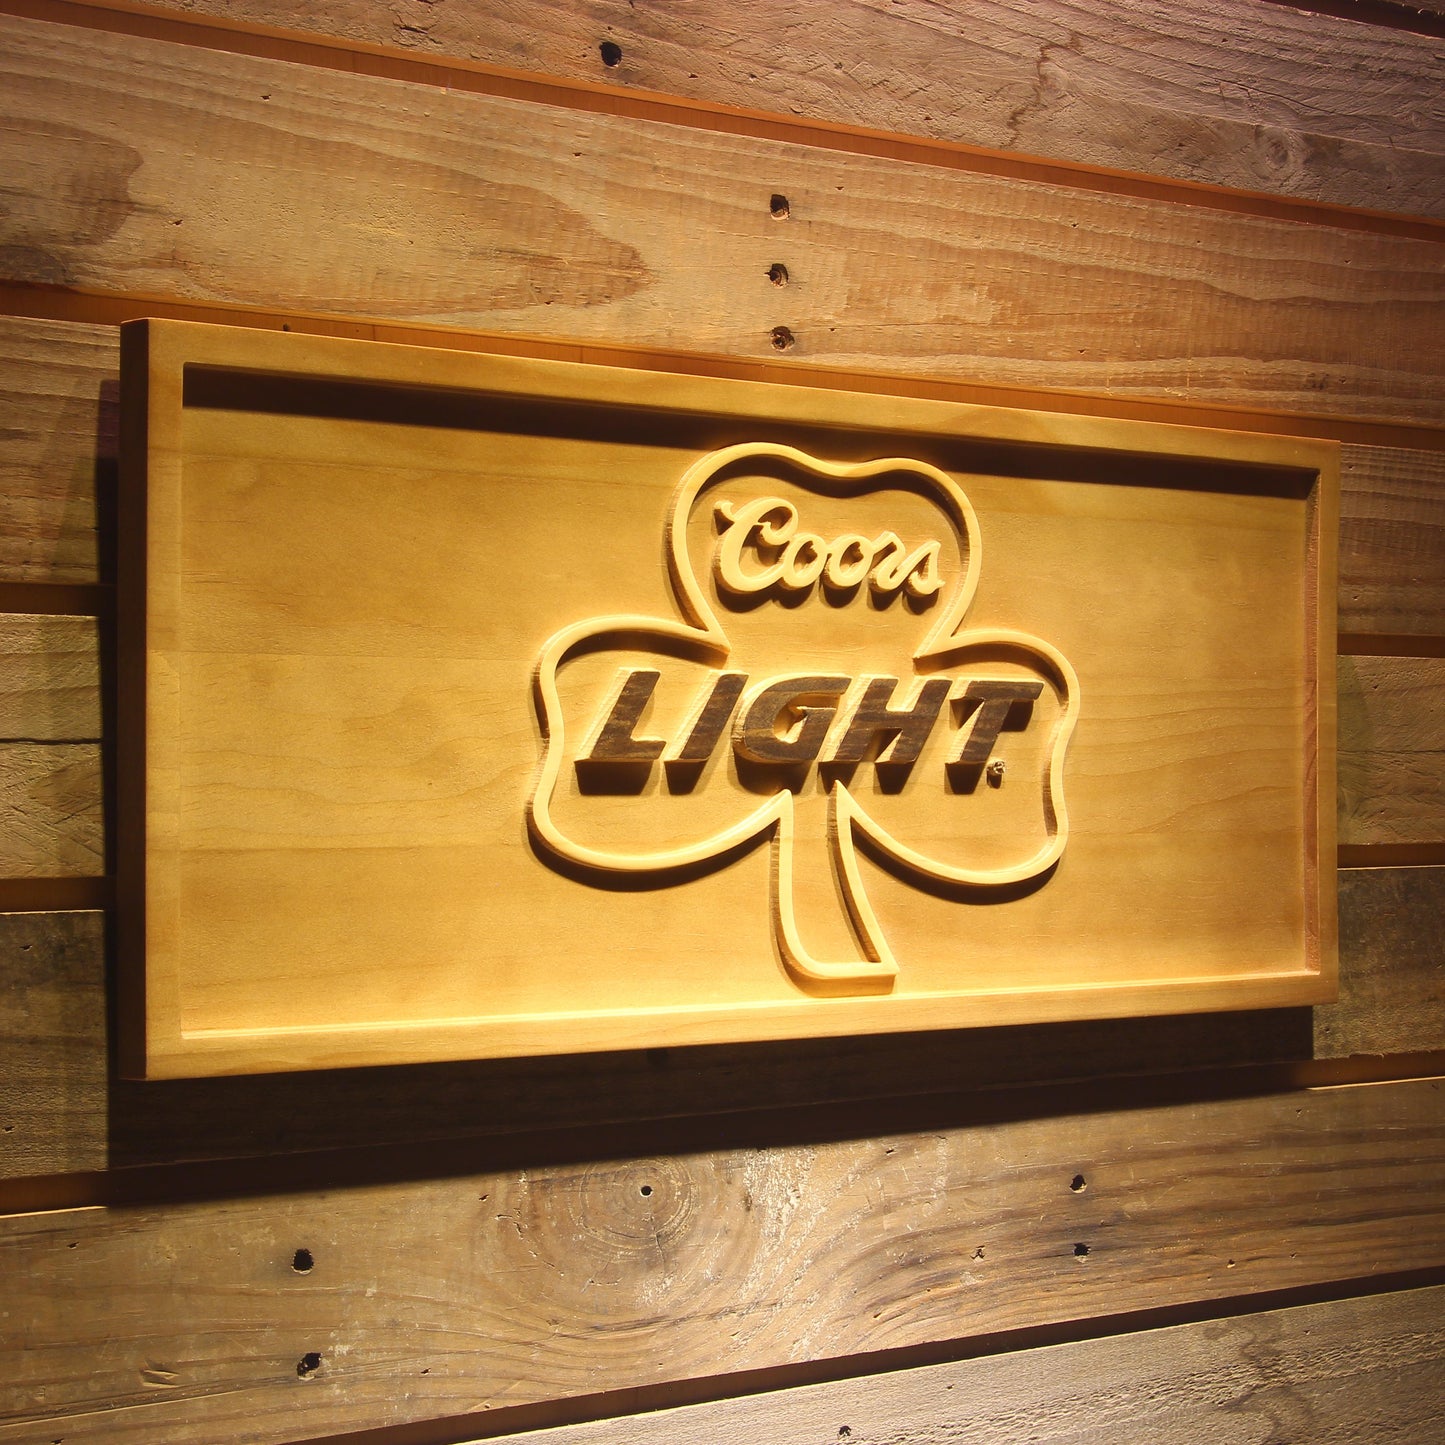 Coors Light Shamrock  3D Wooden Bar Signs by Woody Signs Co. - Handmade Crafted Unique Wooden Creative